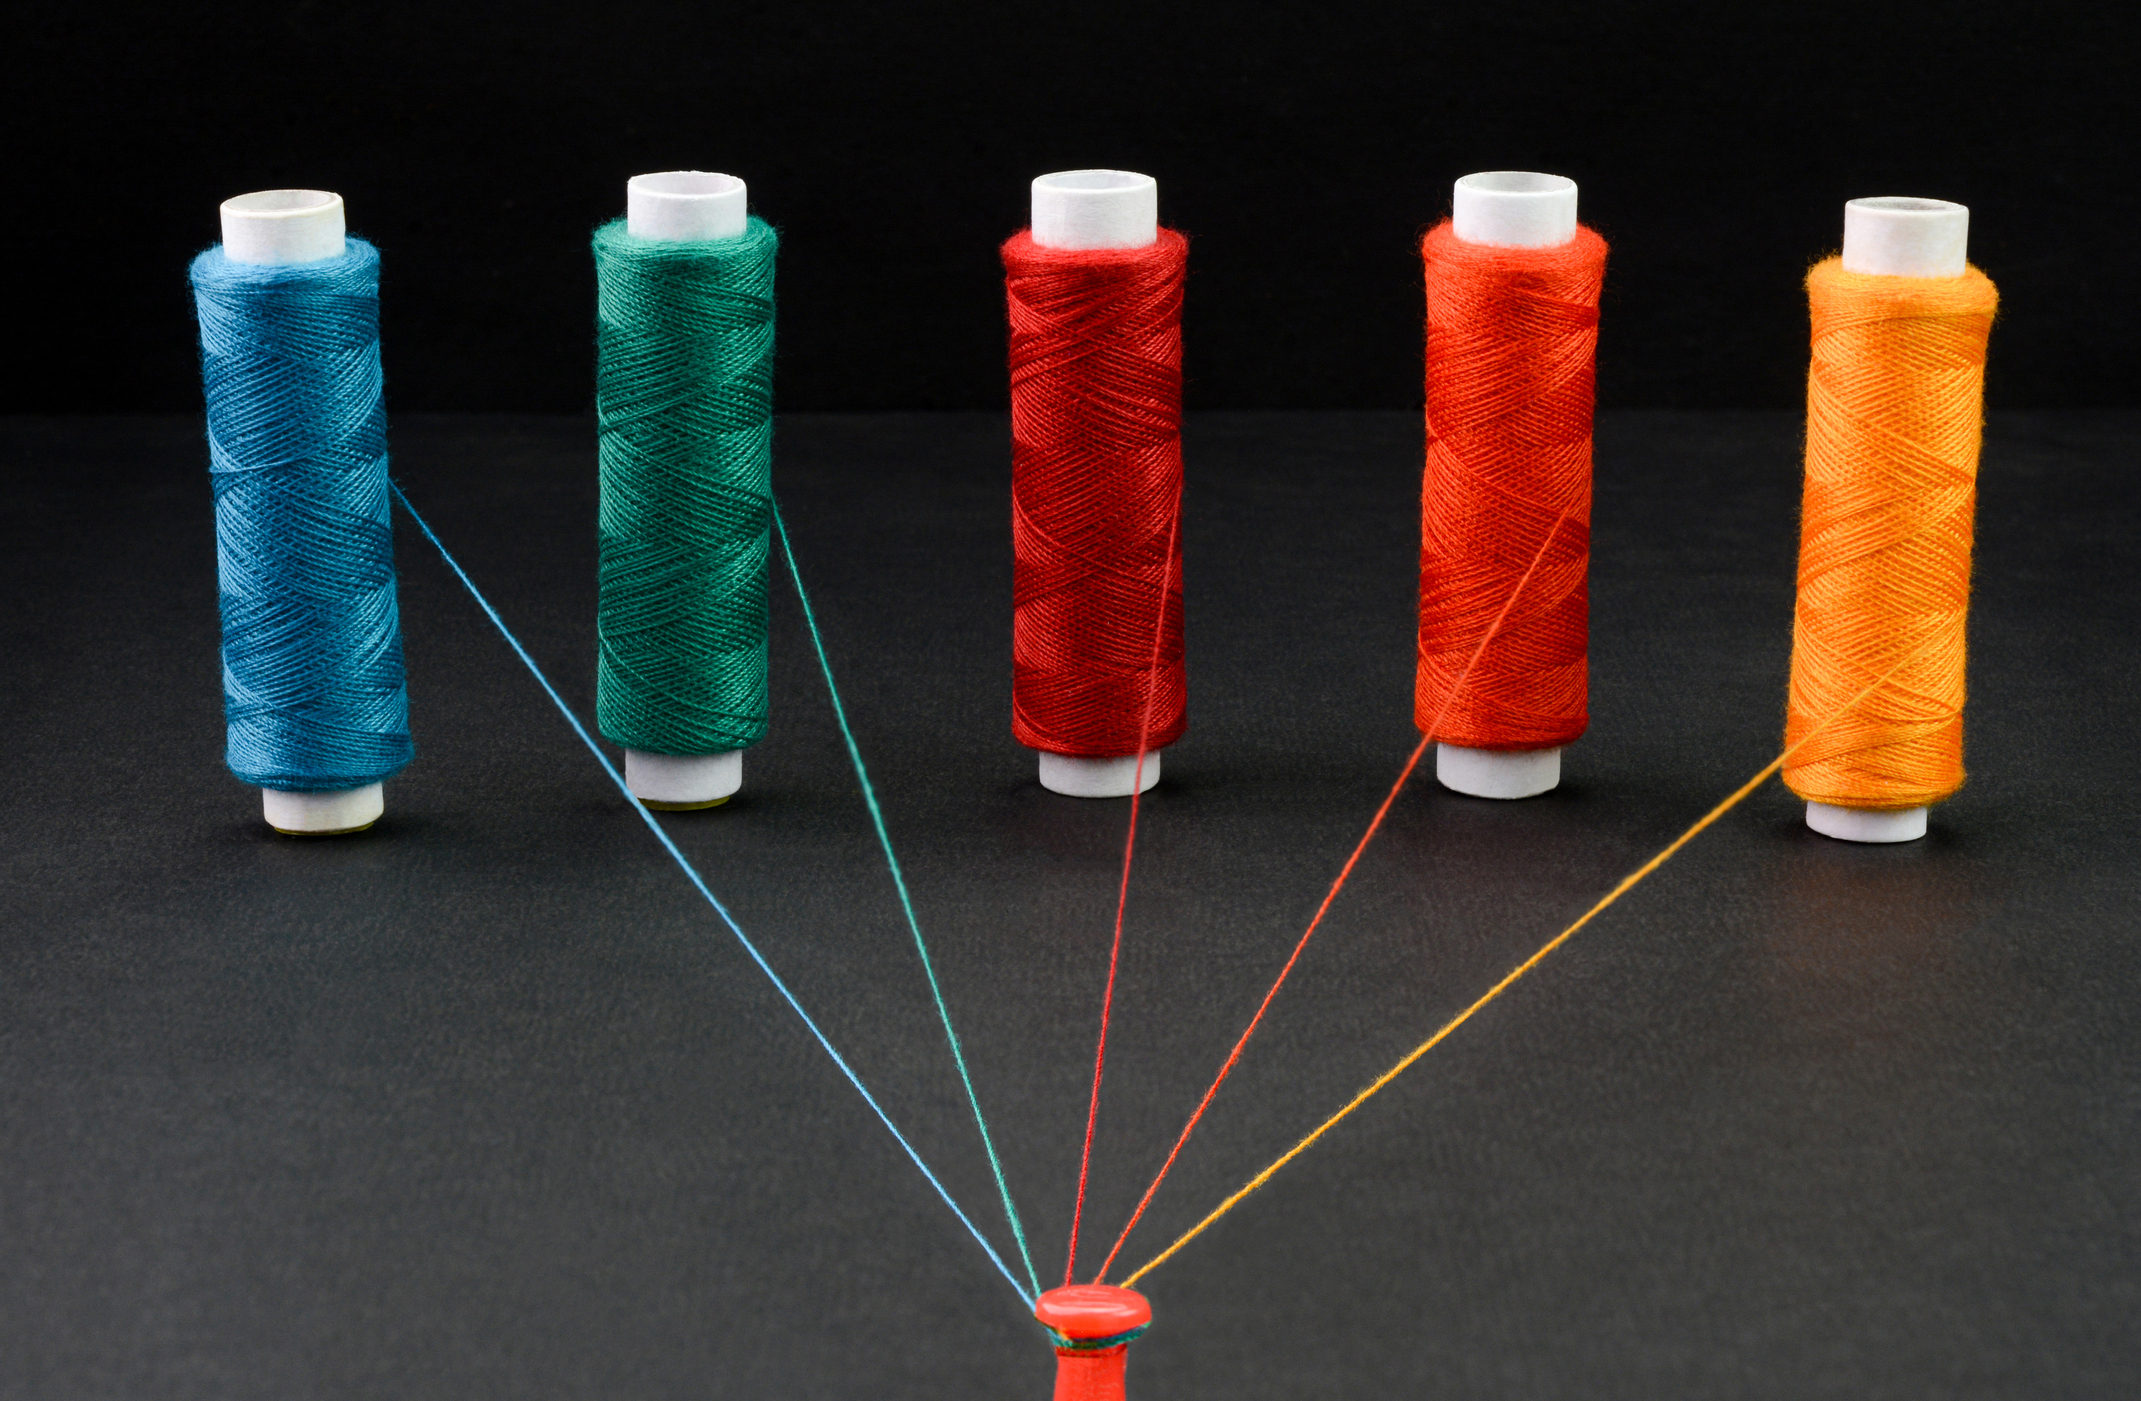 Multicolored strings attached together; 5 ways risk management